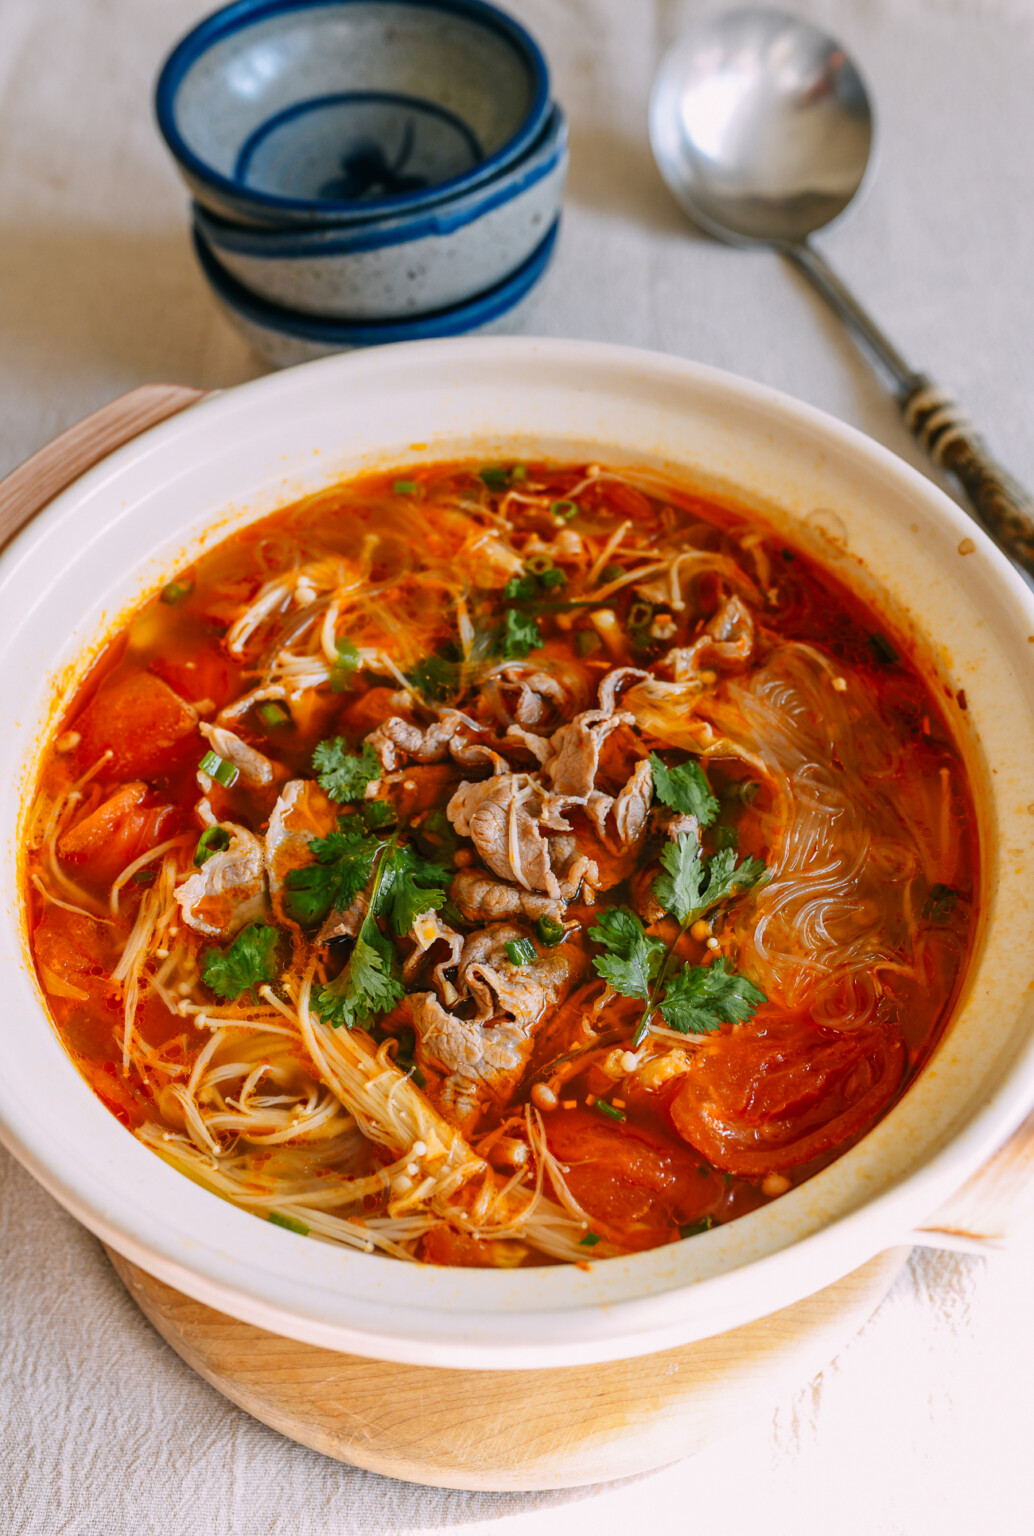 Tomato Hot Pot with Beef - The Woks of Life